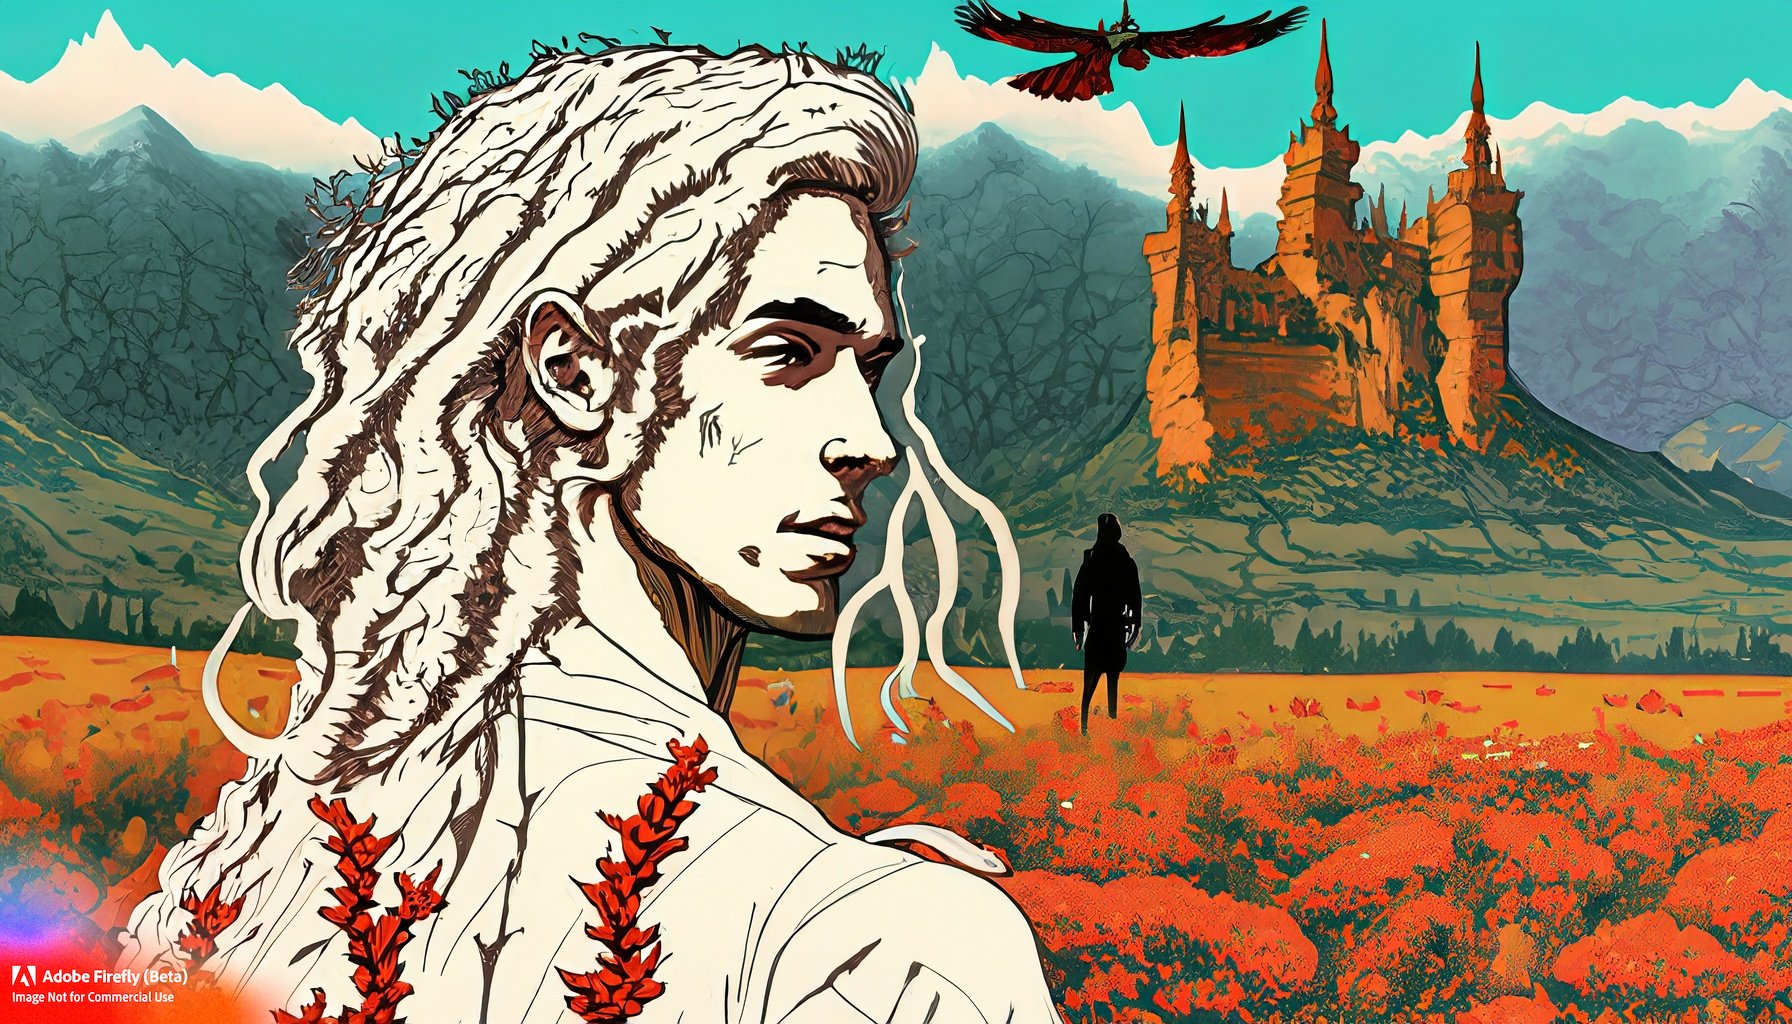 Firefly_a+line etching of a blonde fae facing away from the camera, standing in a meadow of red and orange flowers, with a mountain range of deep greens and a castle in the background, a hawk flying_ (1).jpg